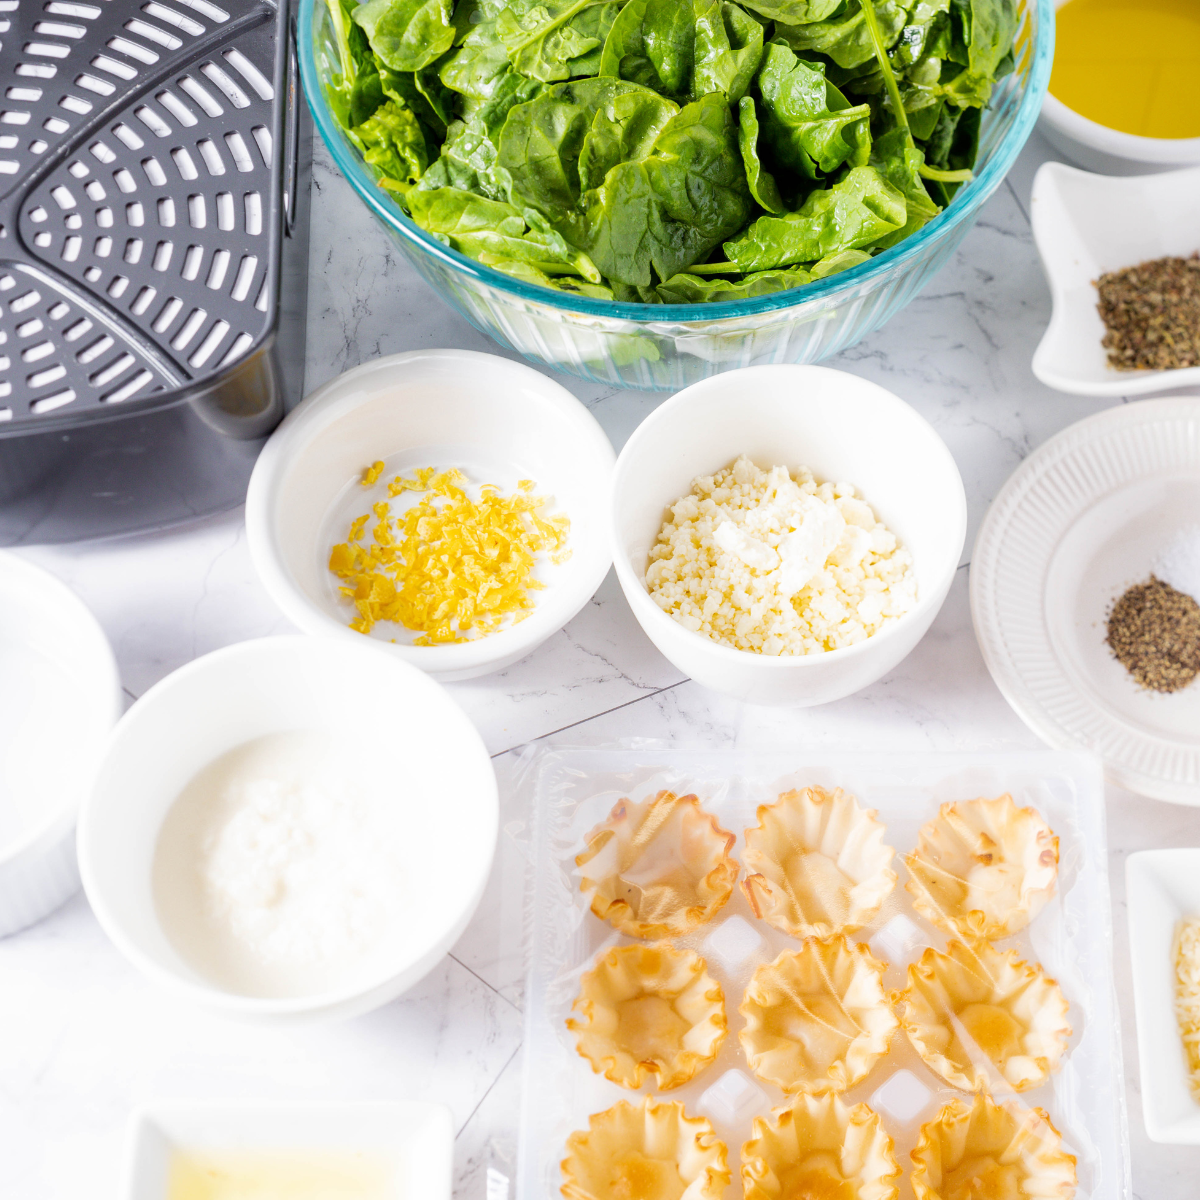 Ingredients Needed For Air Fryer Spanakopita Phyllo Cups